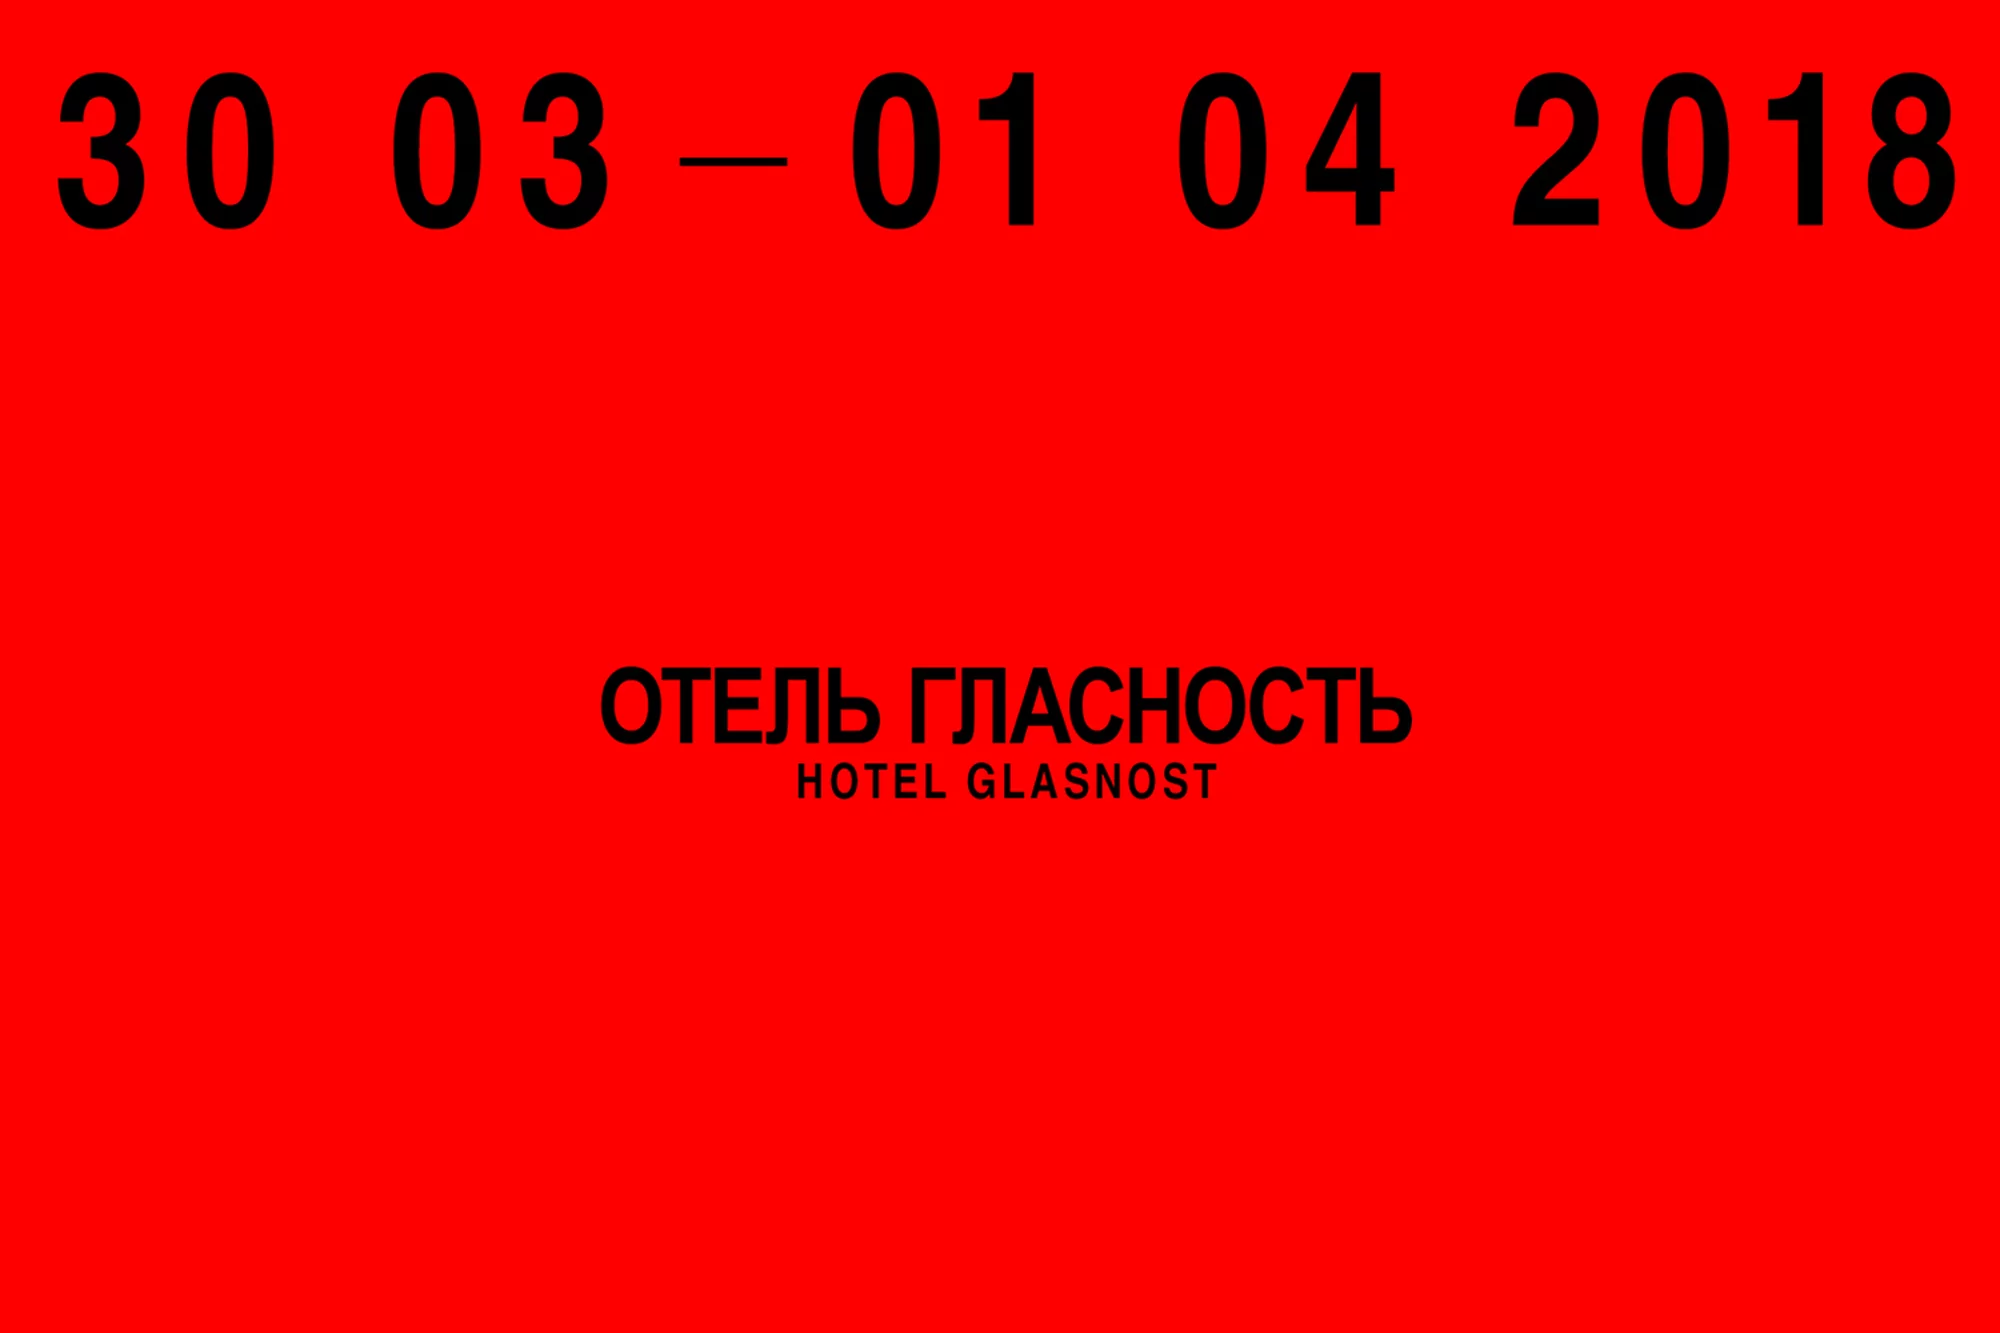 Hotel Glasnost by Daily Dialogue